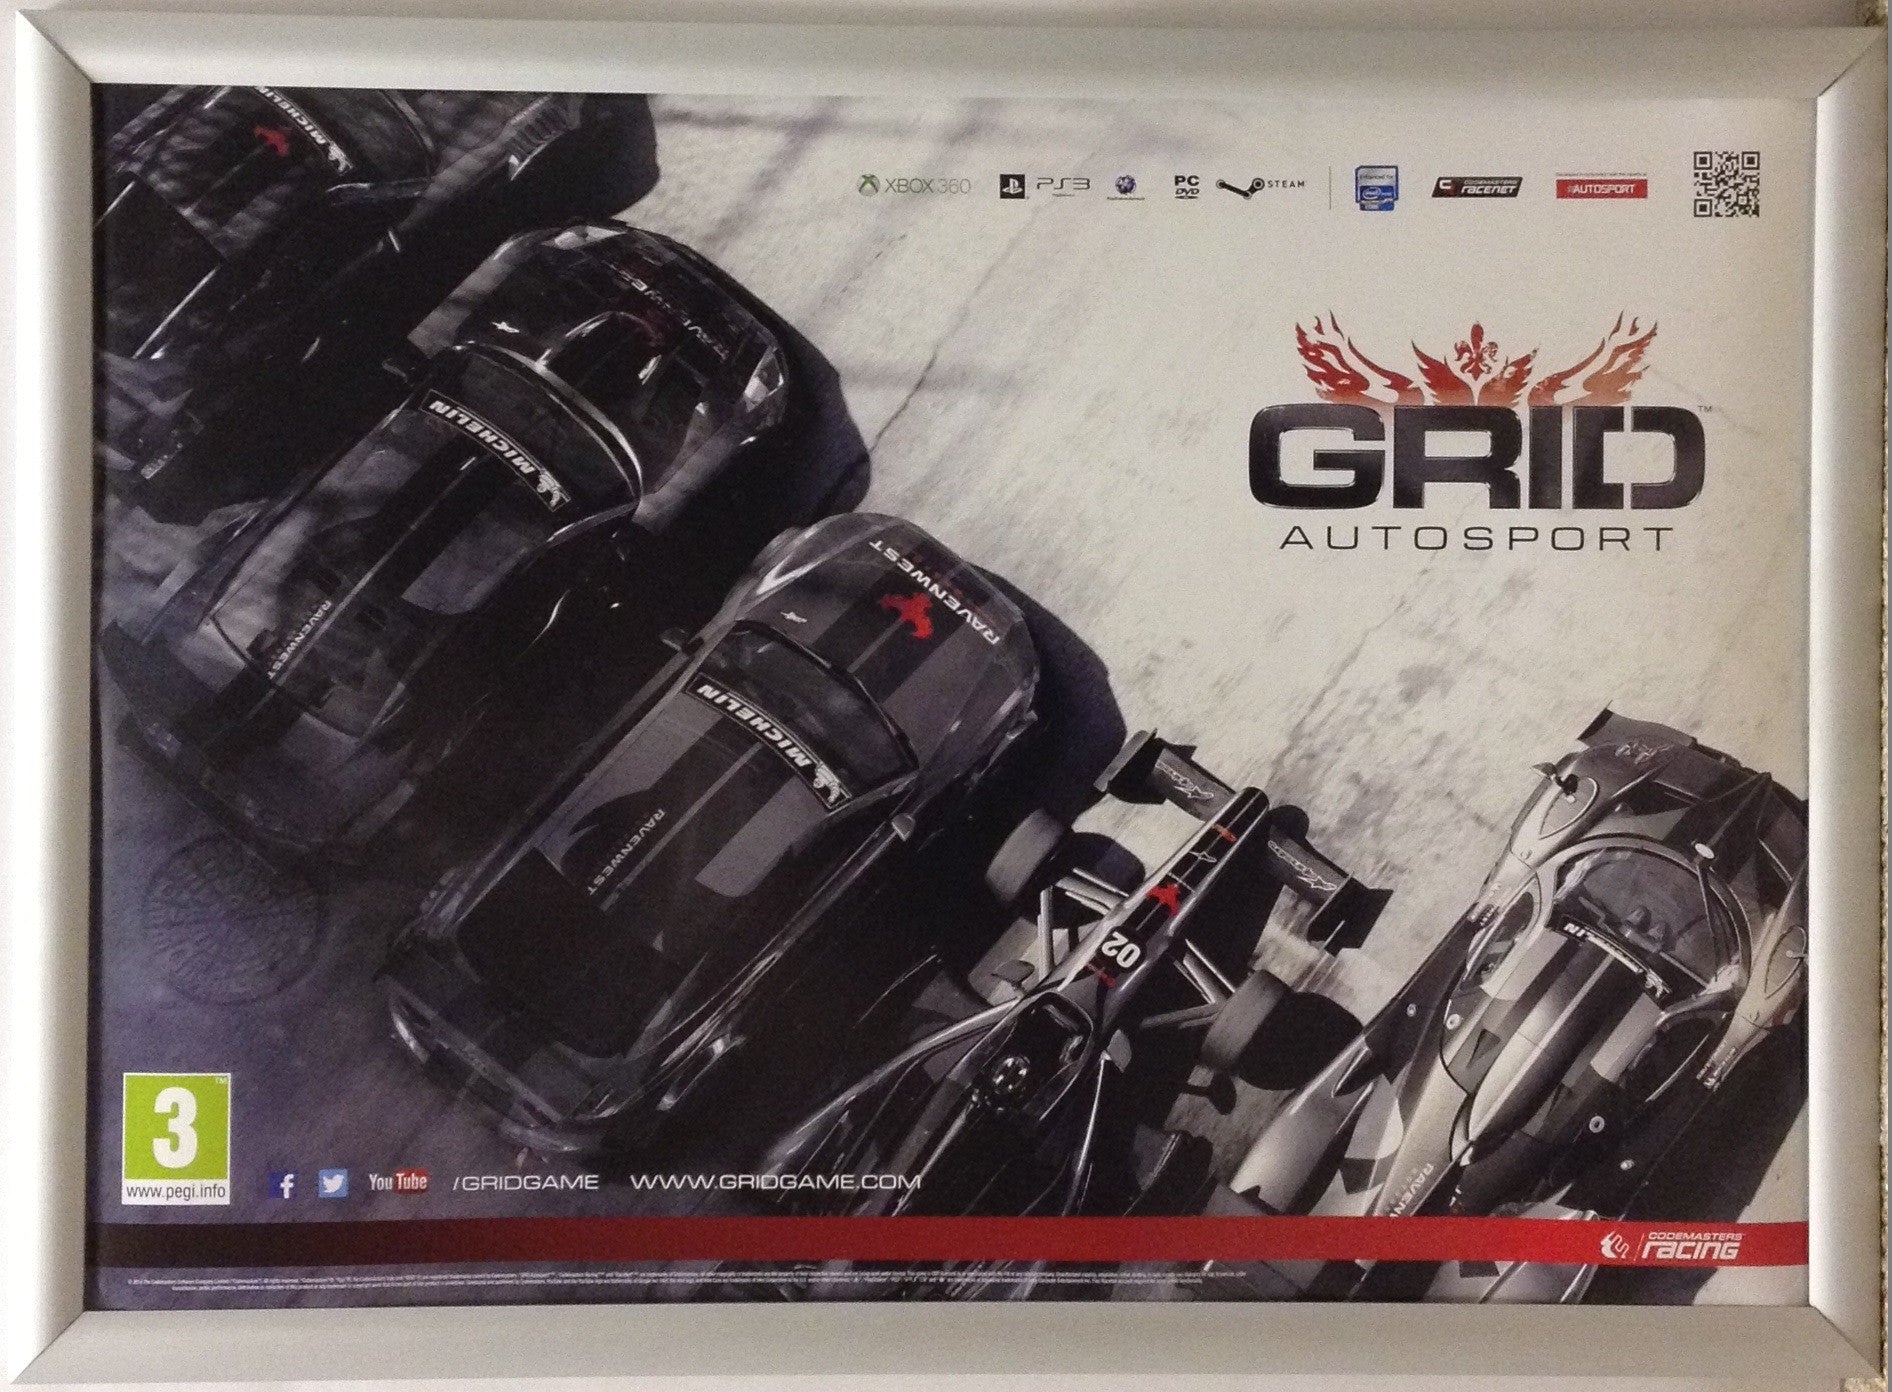 GRID Autosport A2 Promotional Poster #1